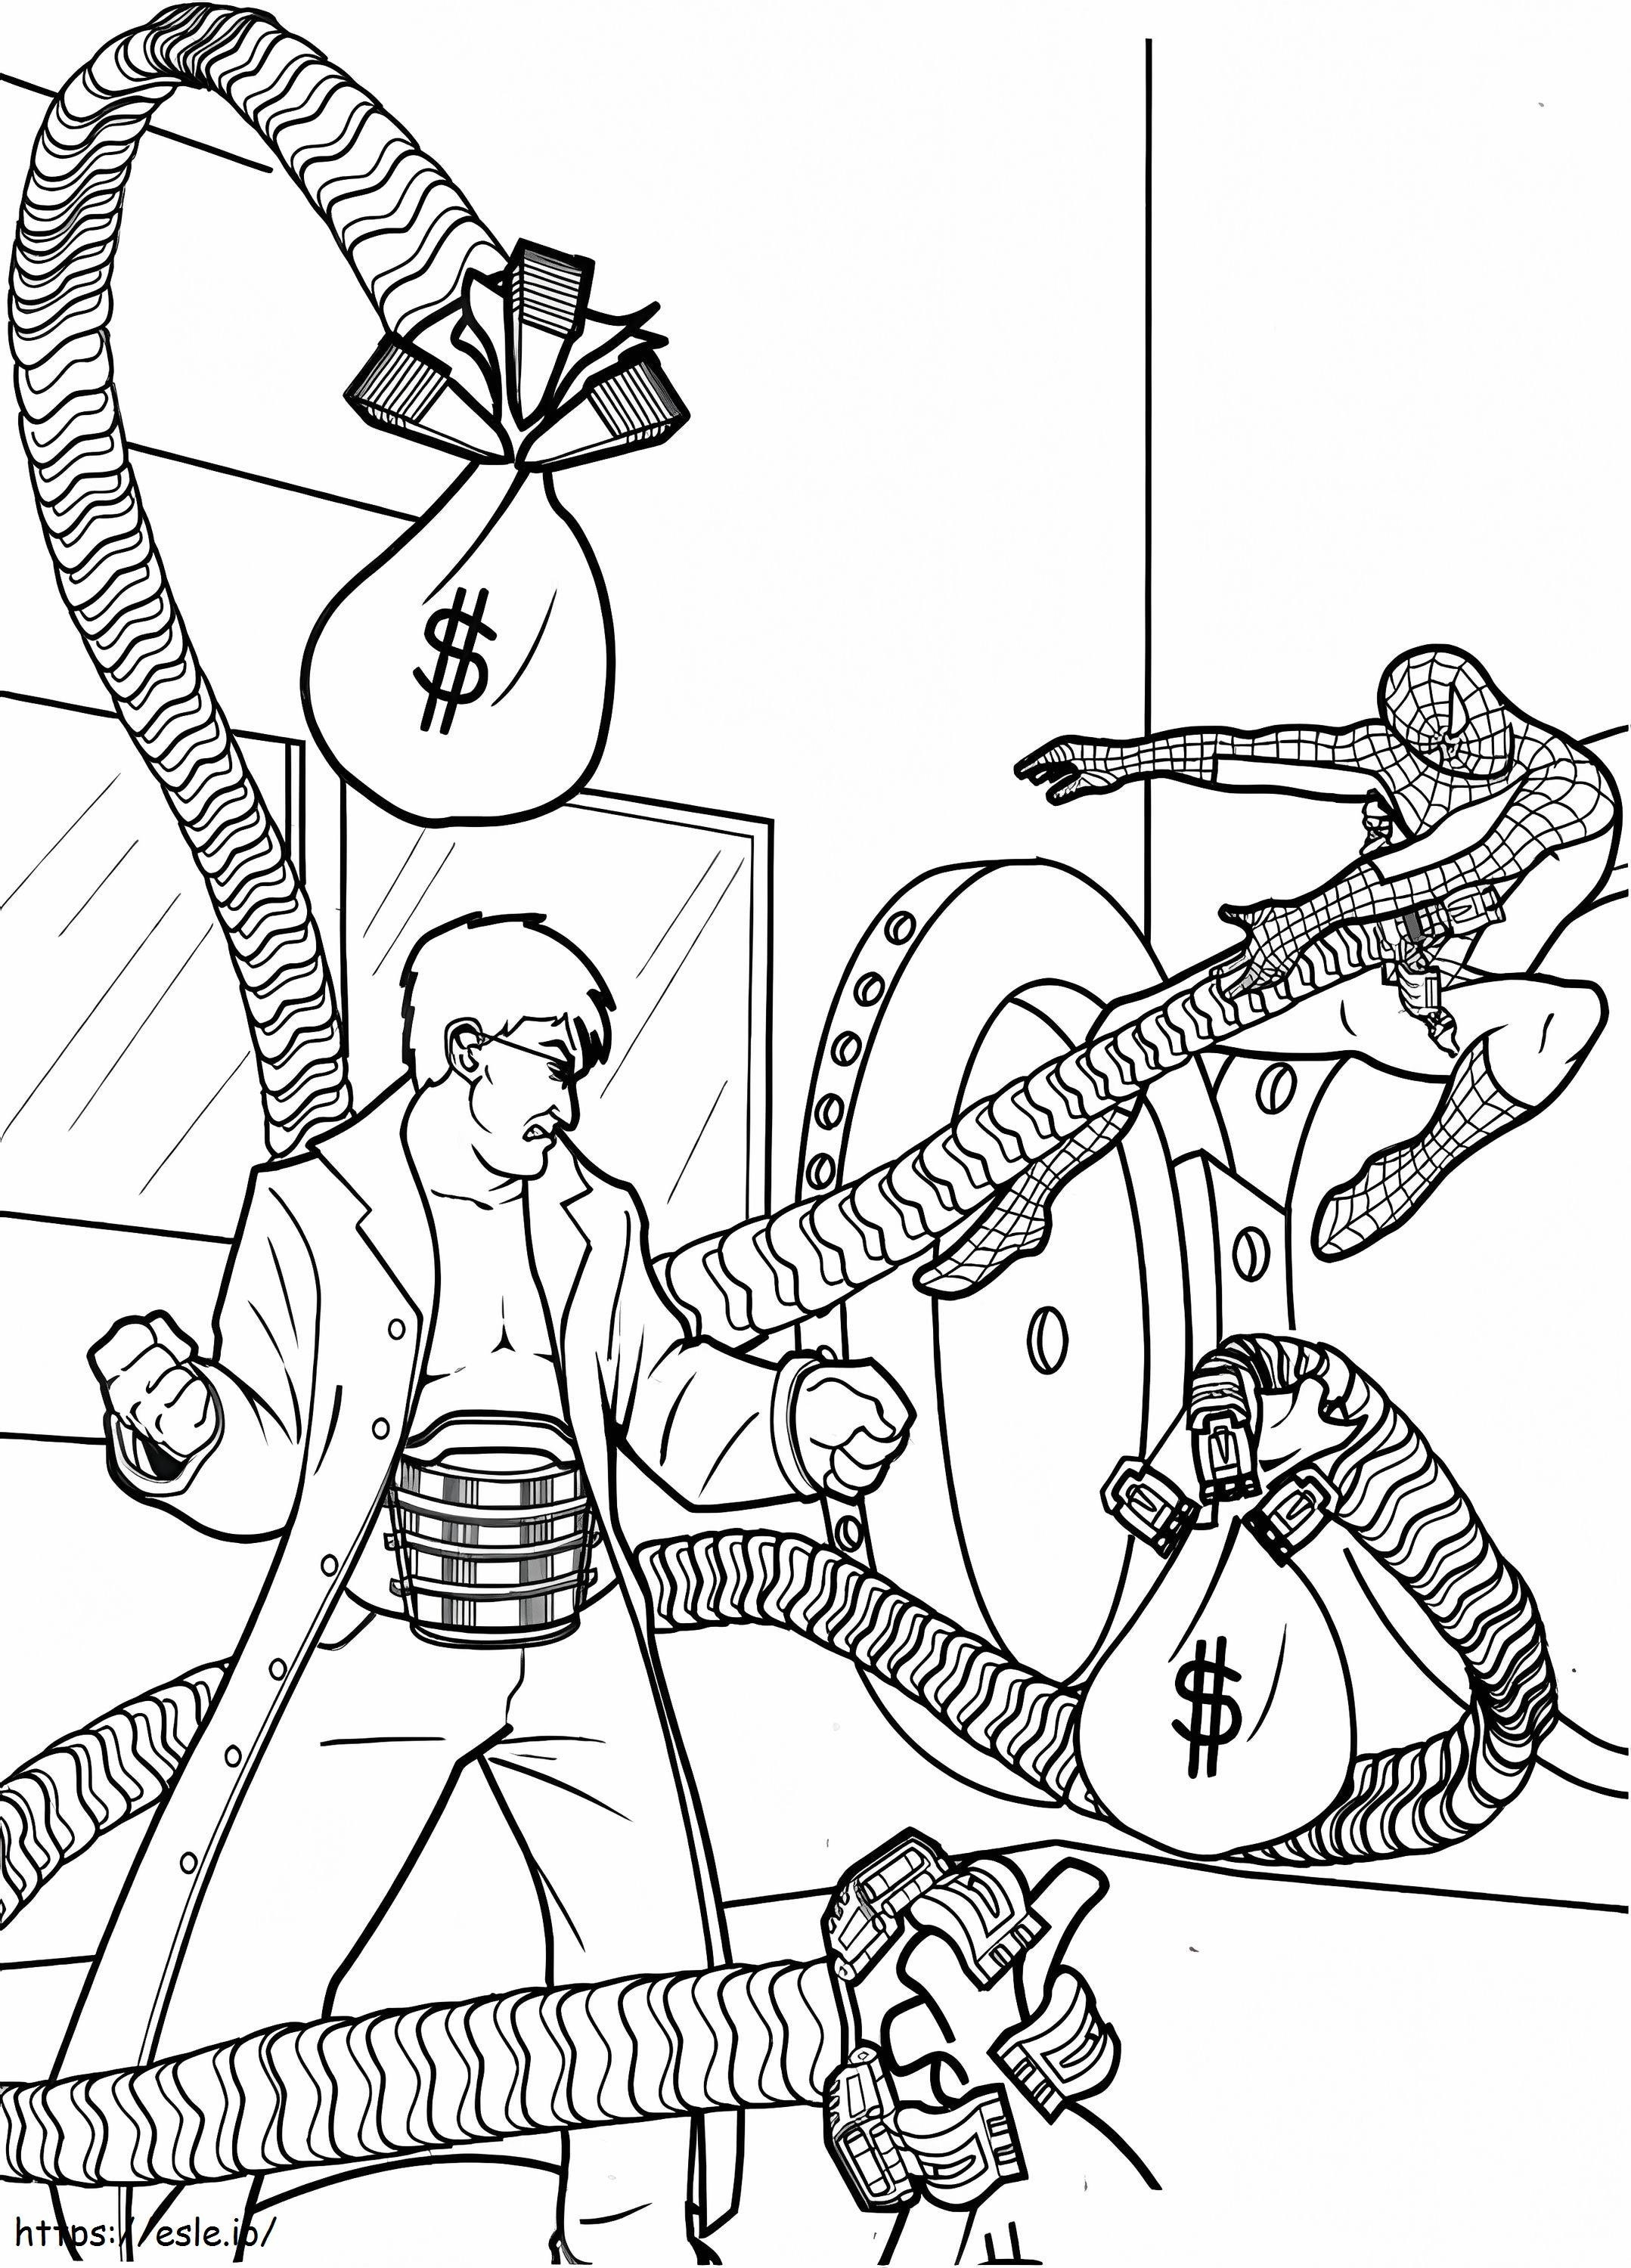 Doccctor Octopus Robbing The Bank A4 coloring page